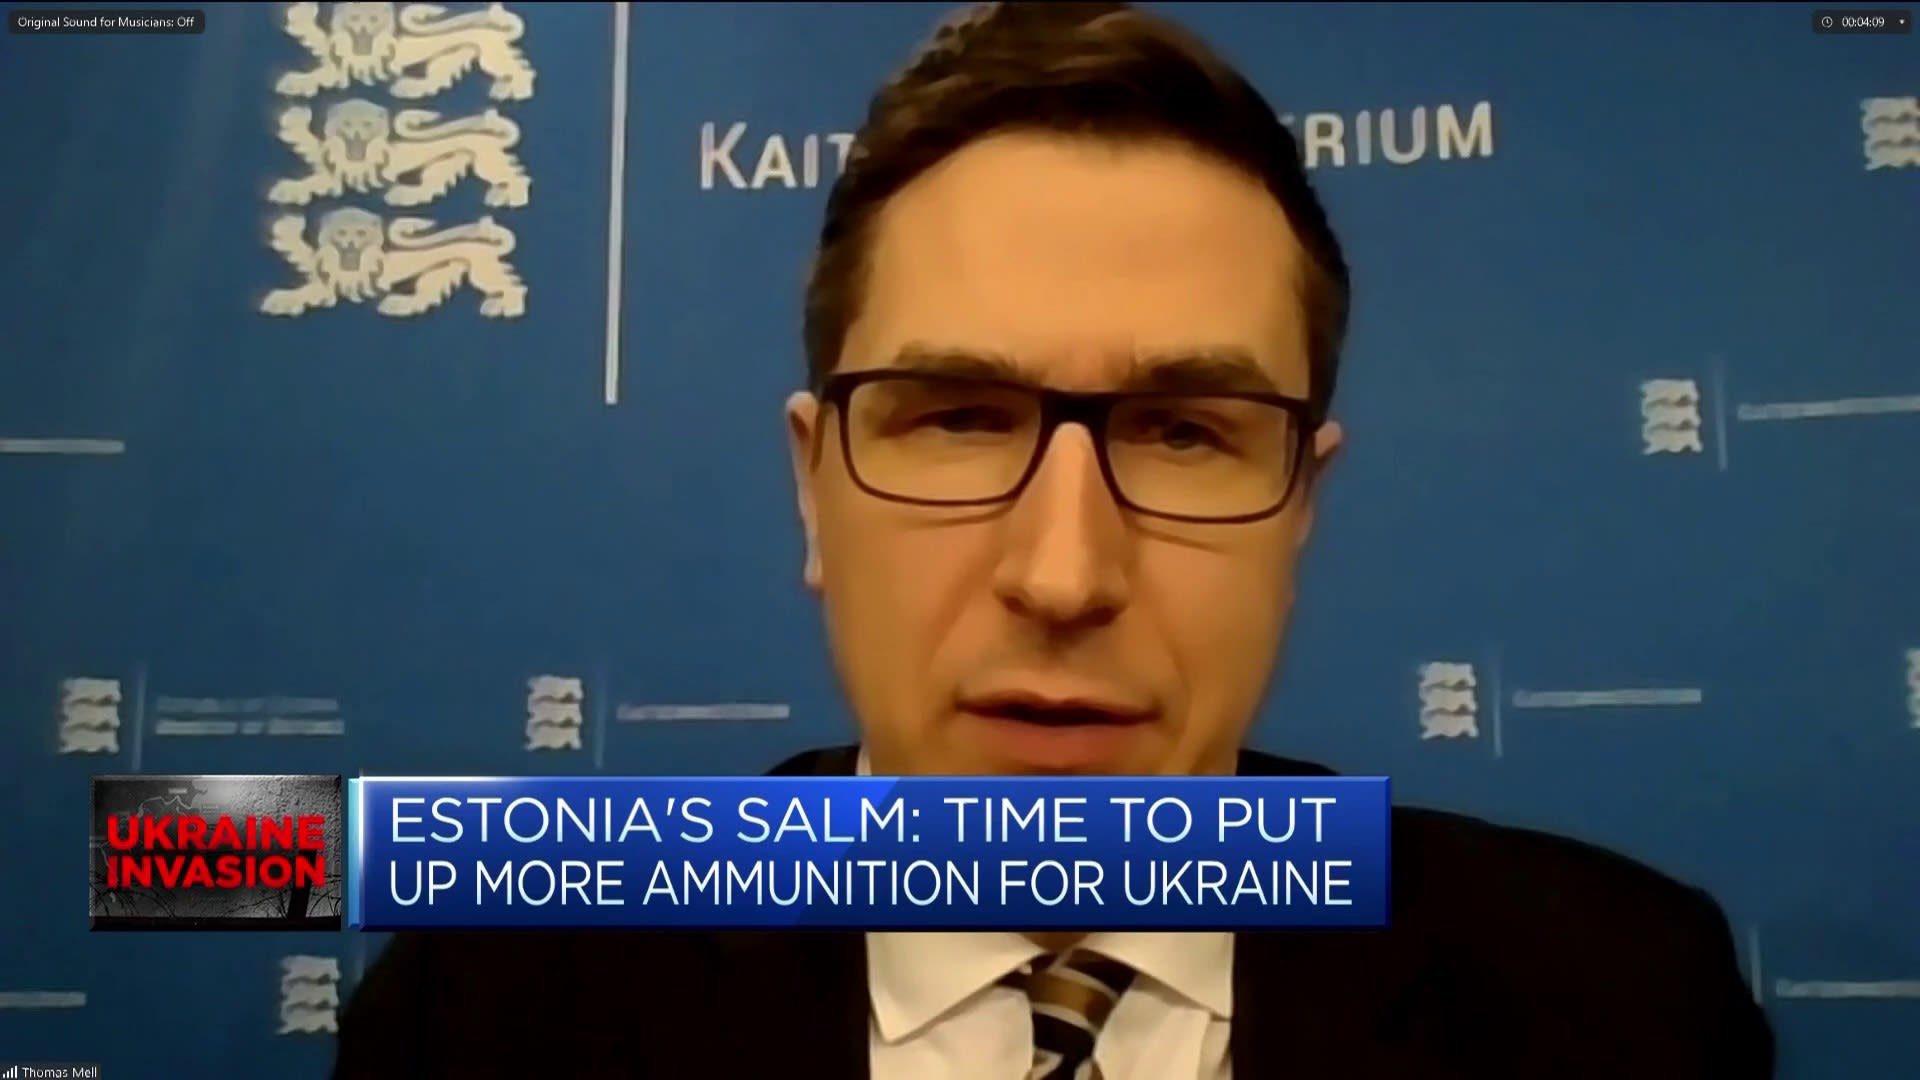 Estonia hopes for a turning point in Ukraine in the next 4 to 6 weeks